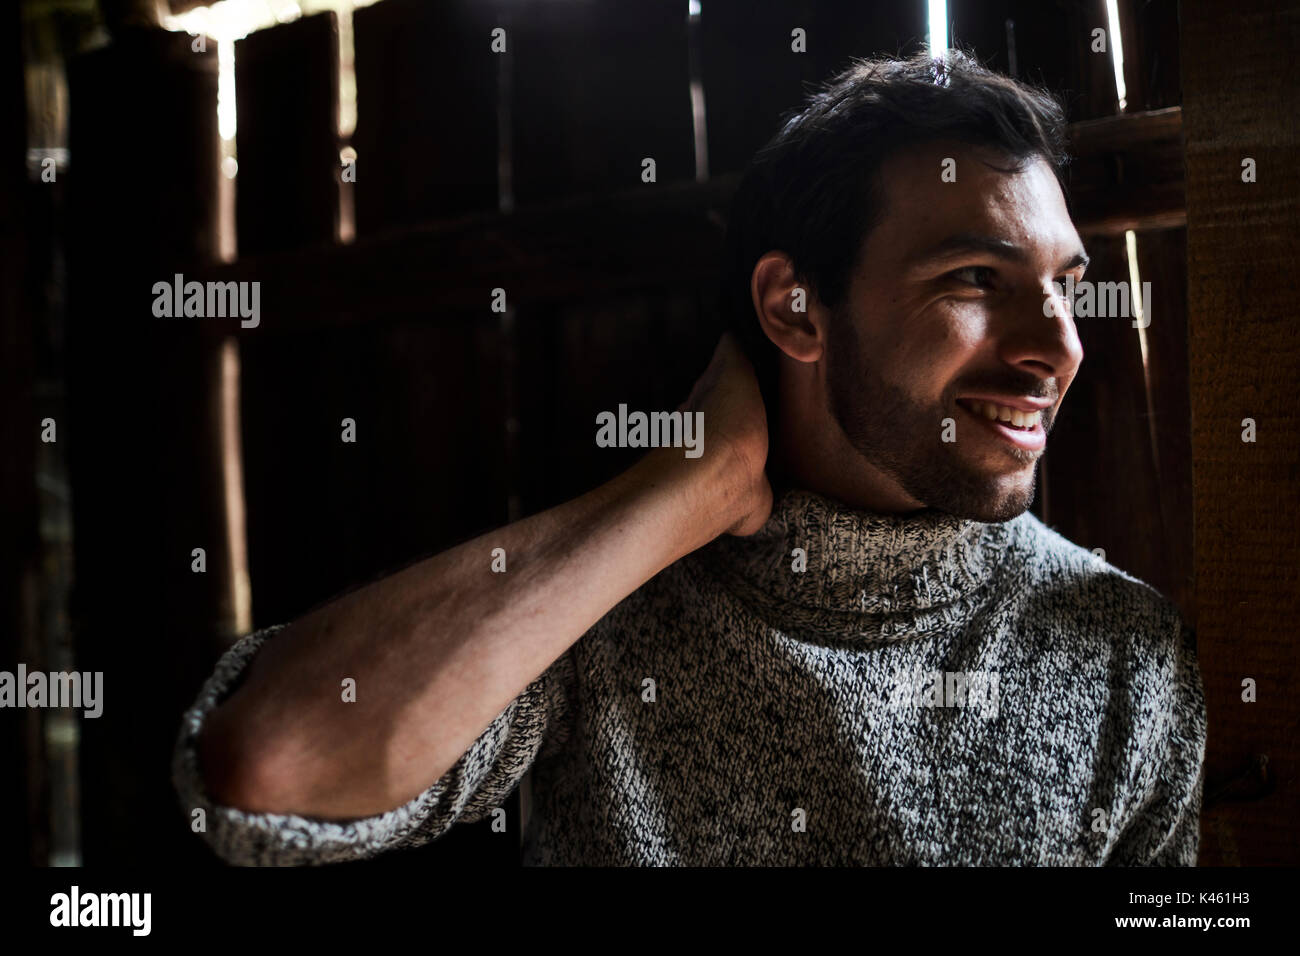 Barn, man with knitted pullover, smile, portrait, Stock Photo